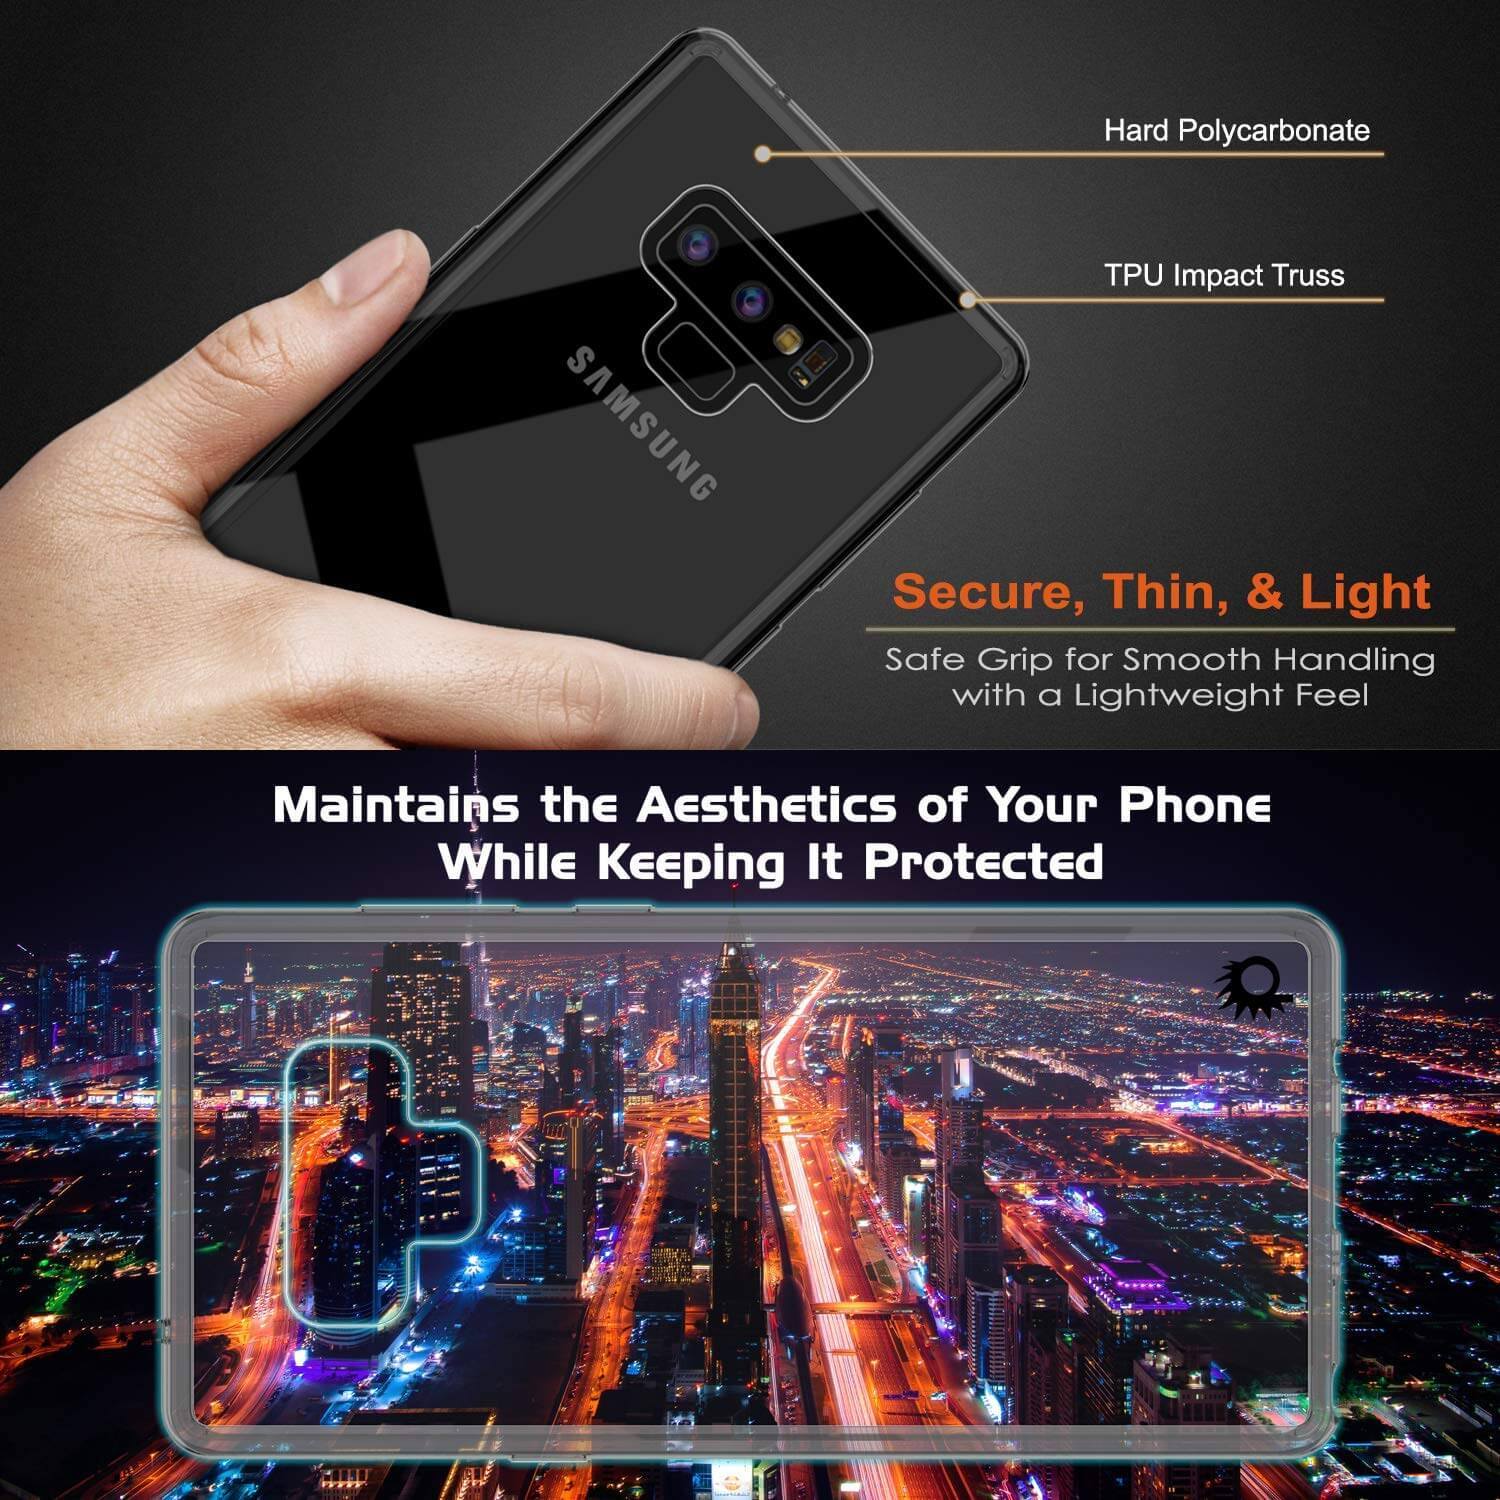 Galaxy Note 9 Case, PUNKcase [LUCID 2.0 Series] [Slim Fit] Armor Cover W/Integrated Anti-Shock System [Crystal Black]